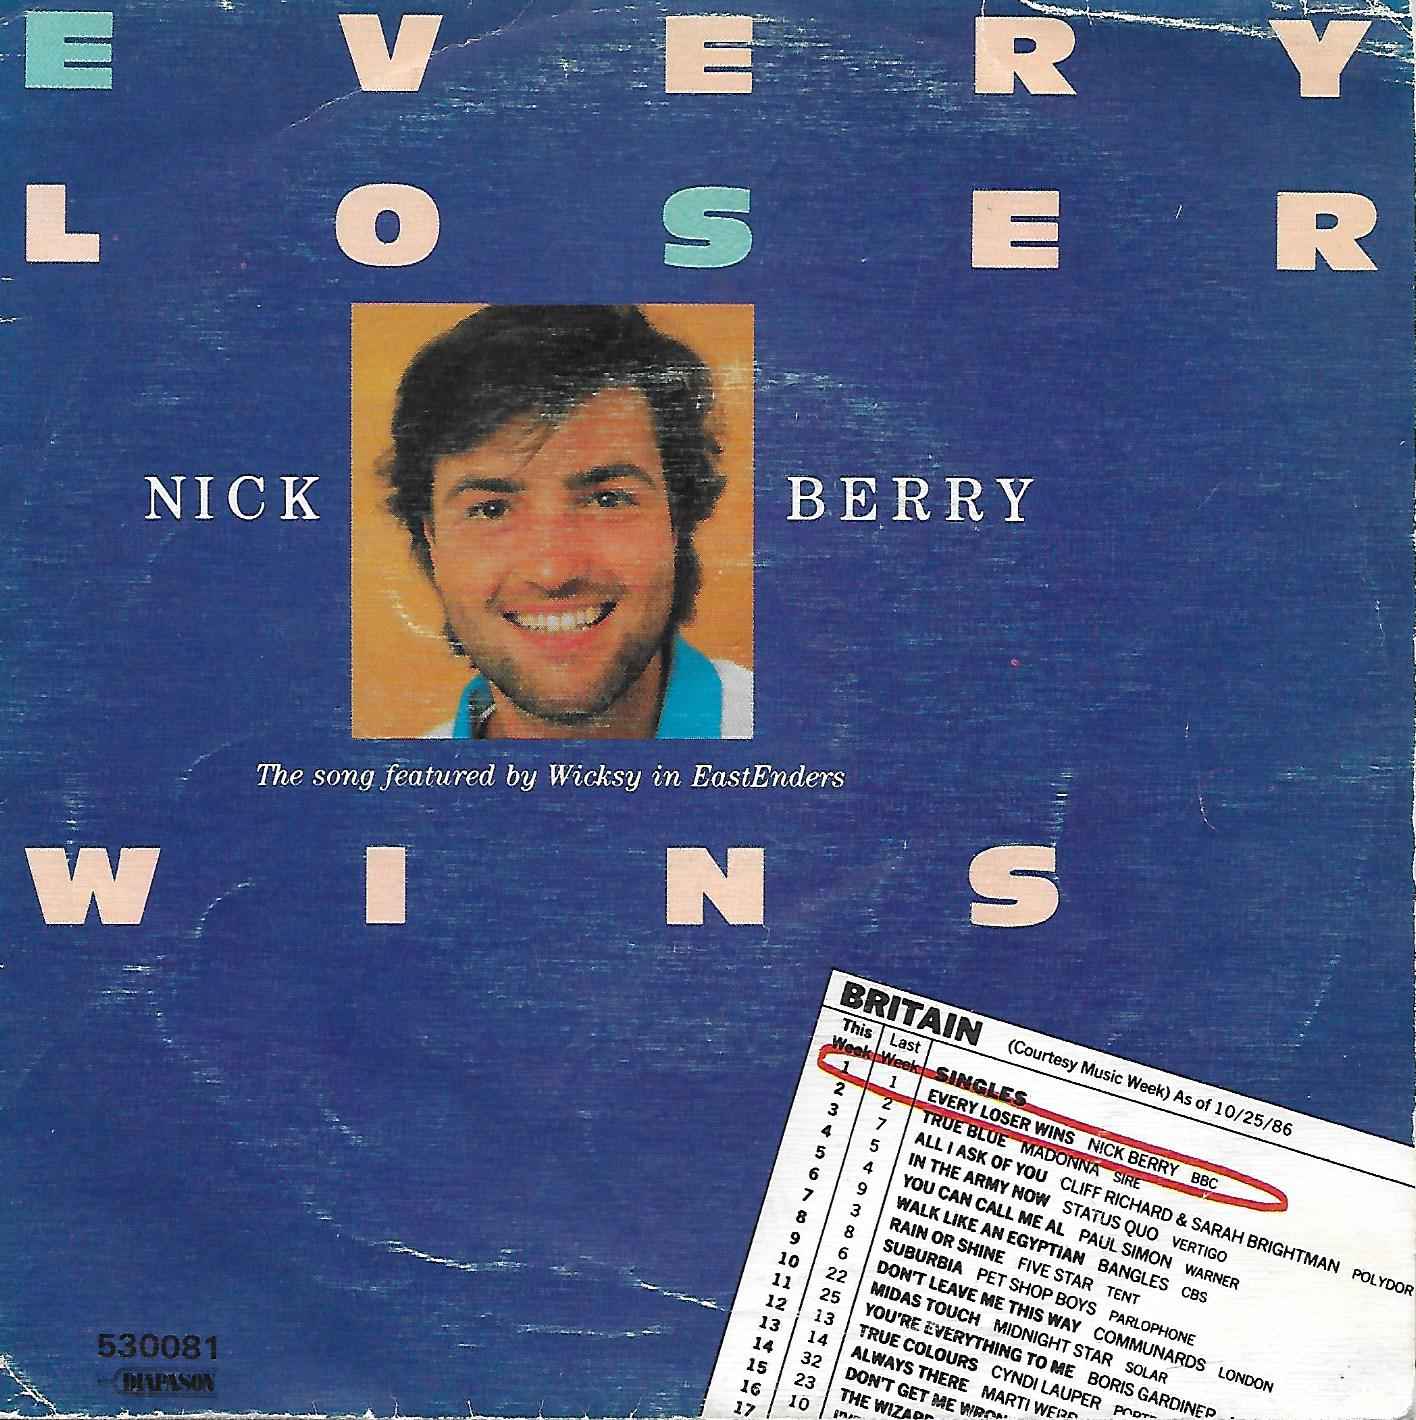 Picture of 53.0081 Every loser wins by artist Nick Berry from the BBC singles - Records and Tapes library